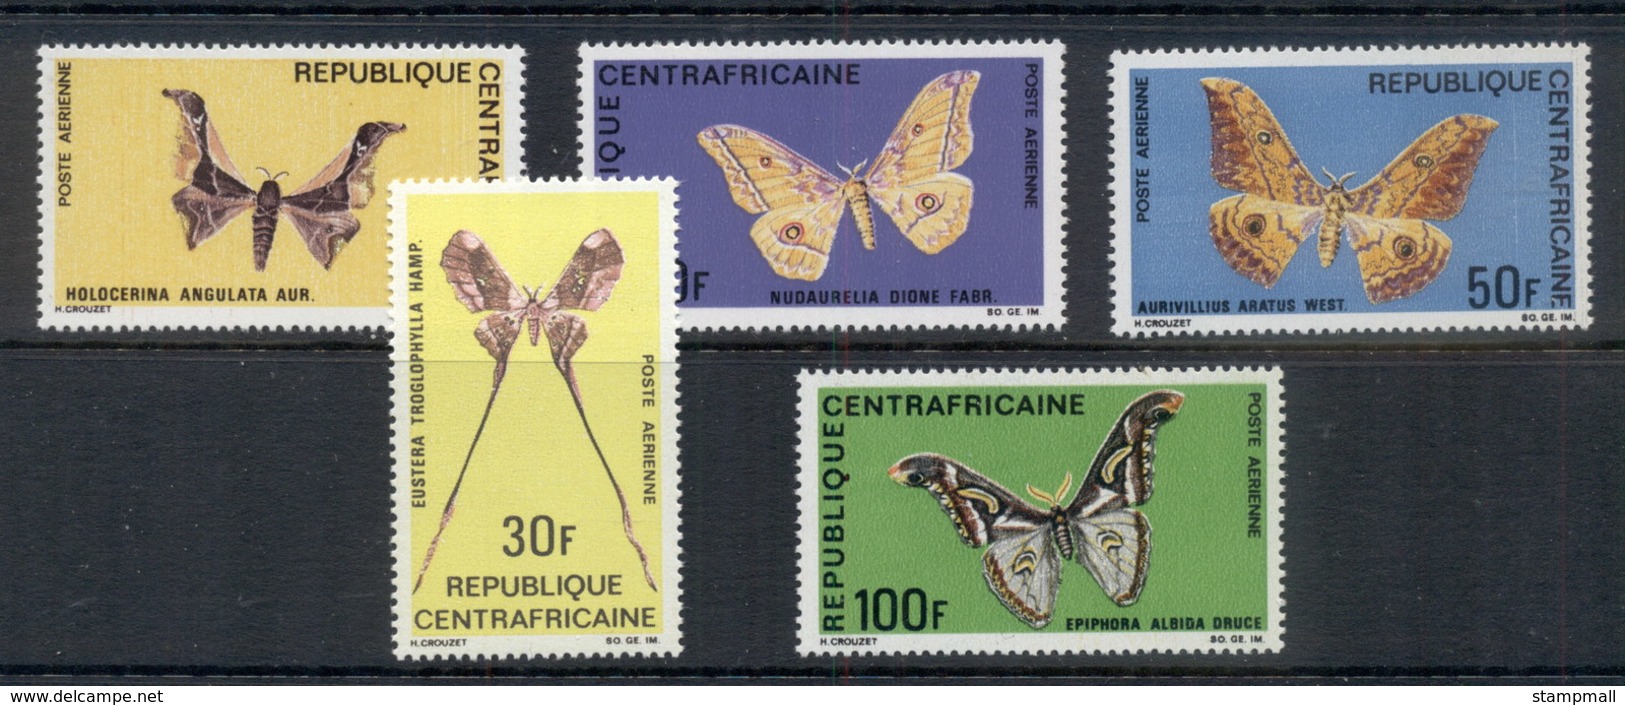 Central African Republic 1969 Insects Butterflies & Moths MUH - Central African Republic